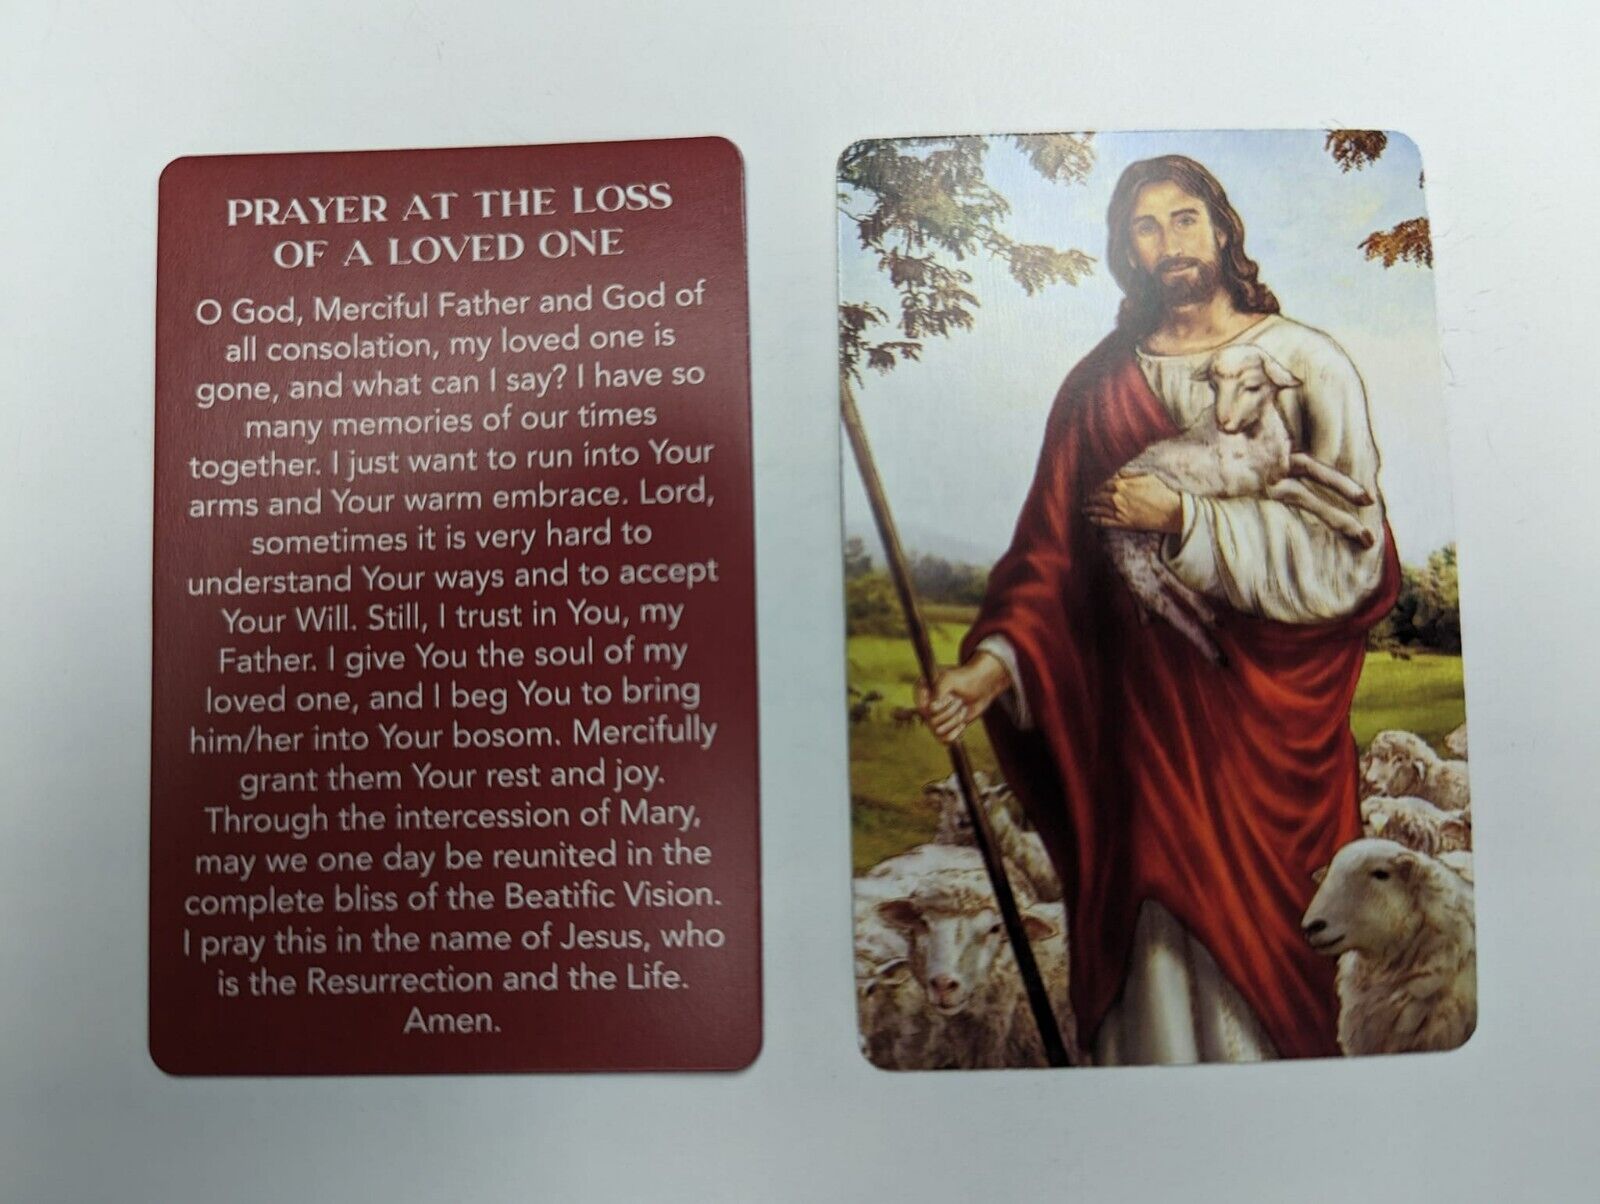 PRAYER AT THE LOSS OF A LOVED ONE (Lot of 2 Laminated Catholic prayer cards